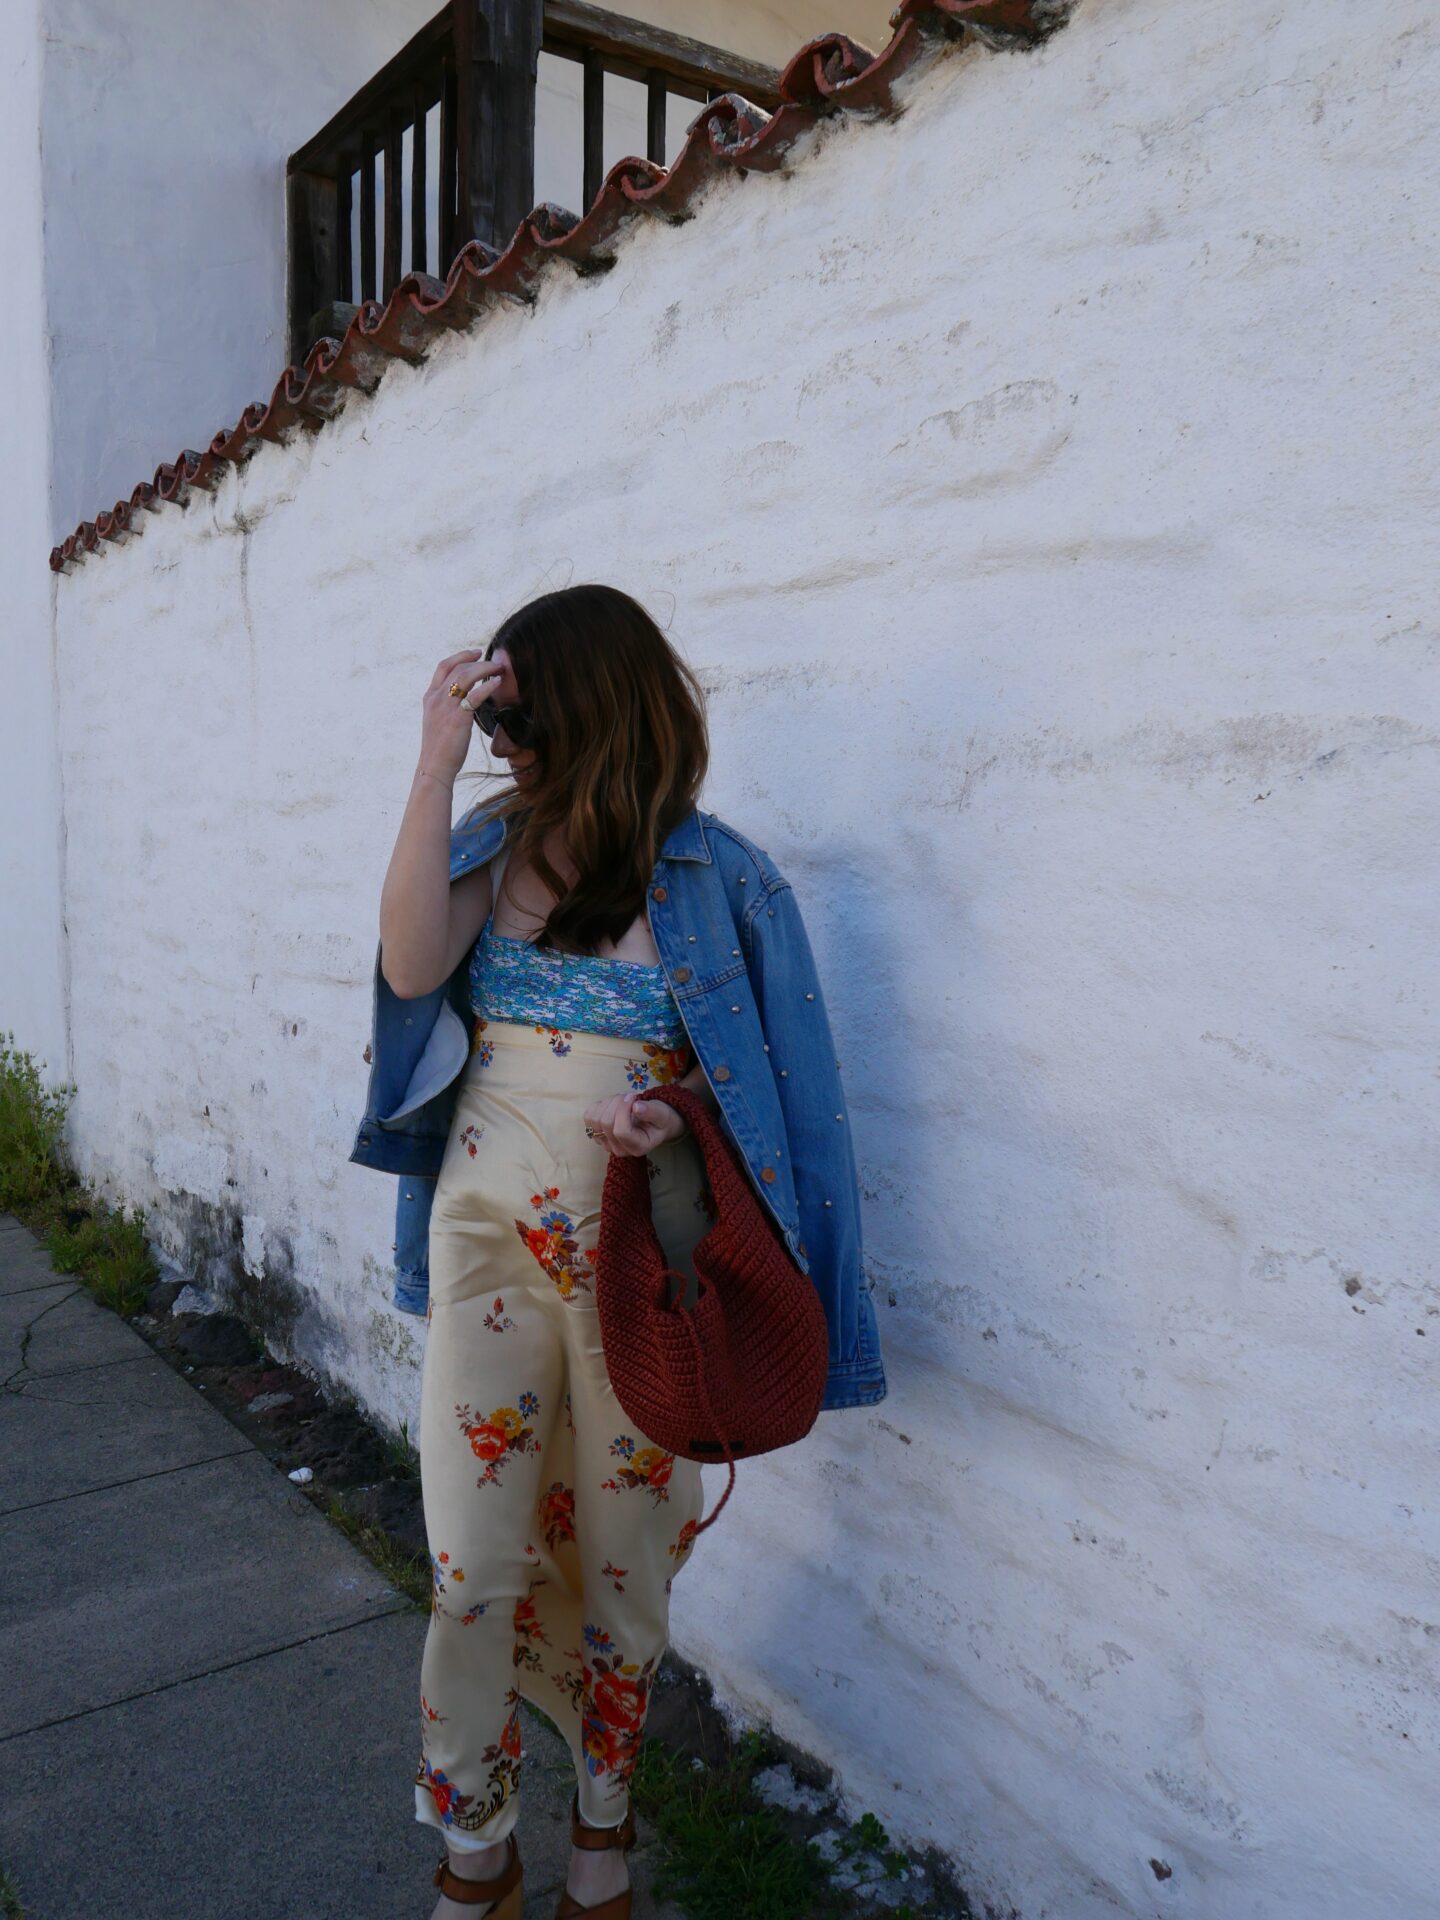 woman standing near a wall and wearing denim jacket, dress with floral prints and holding a red bag in Sonoma